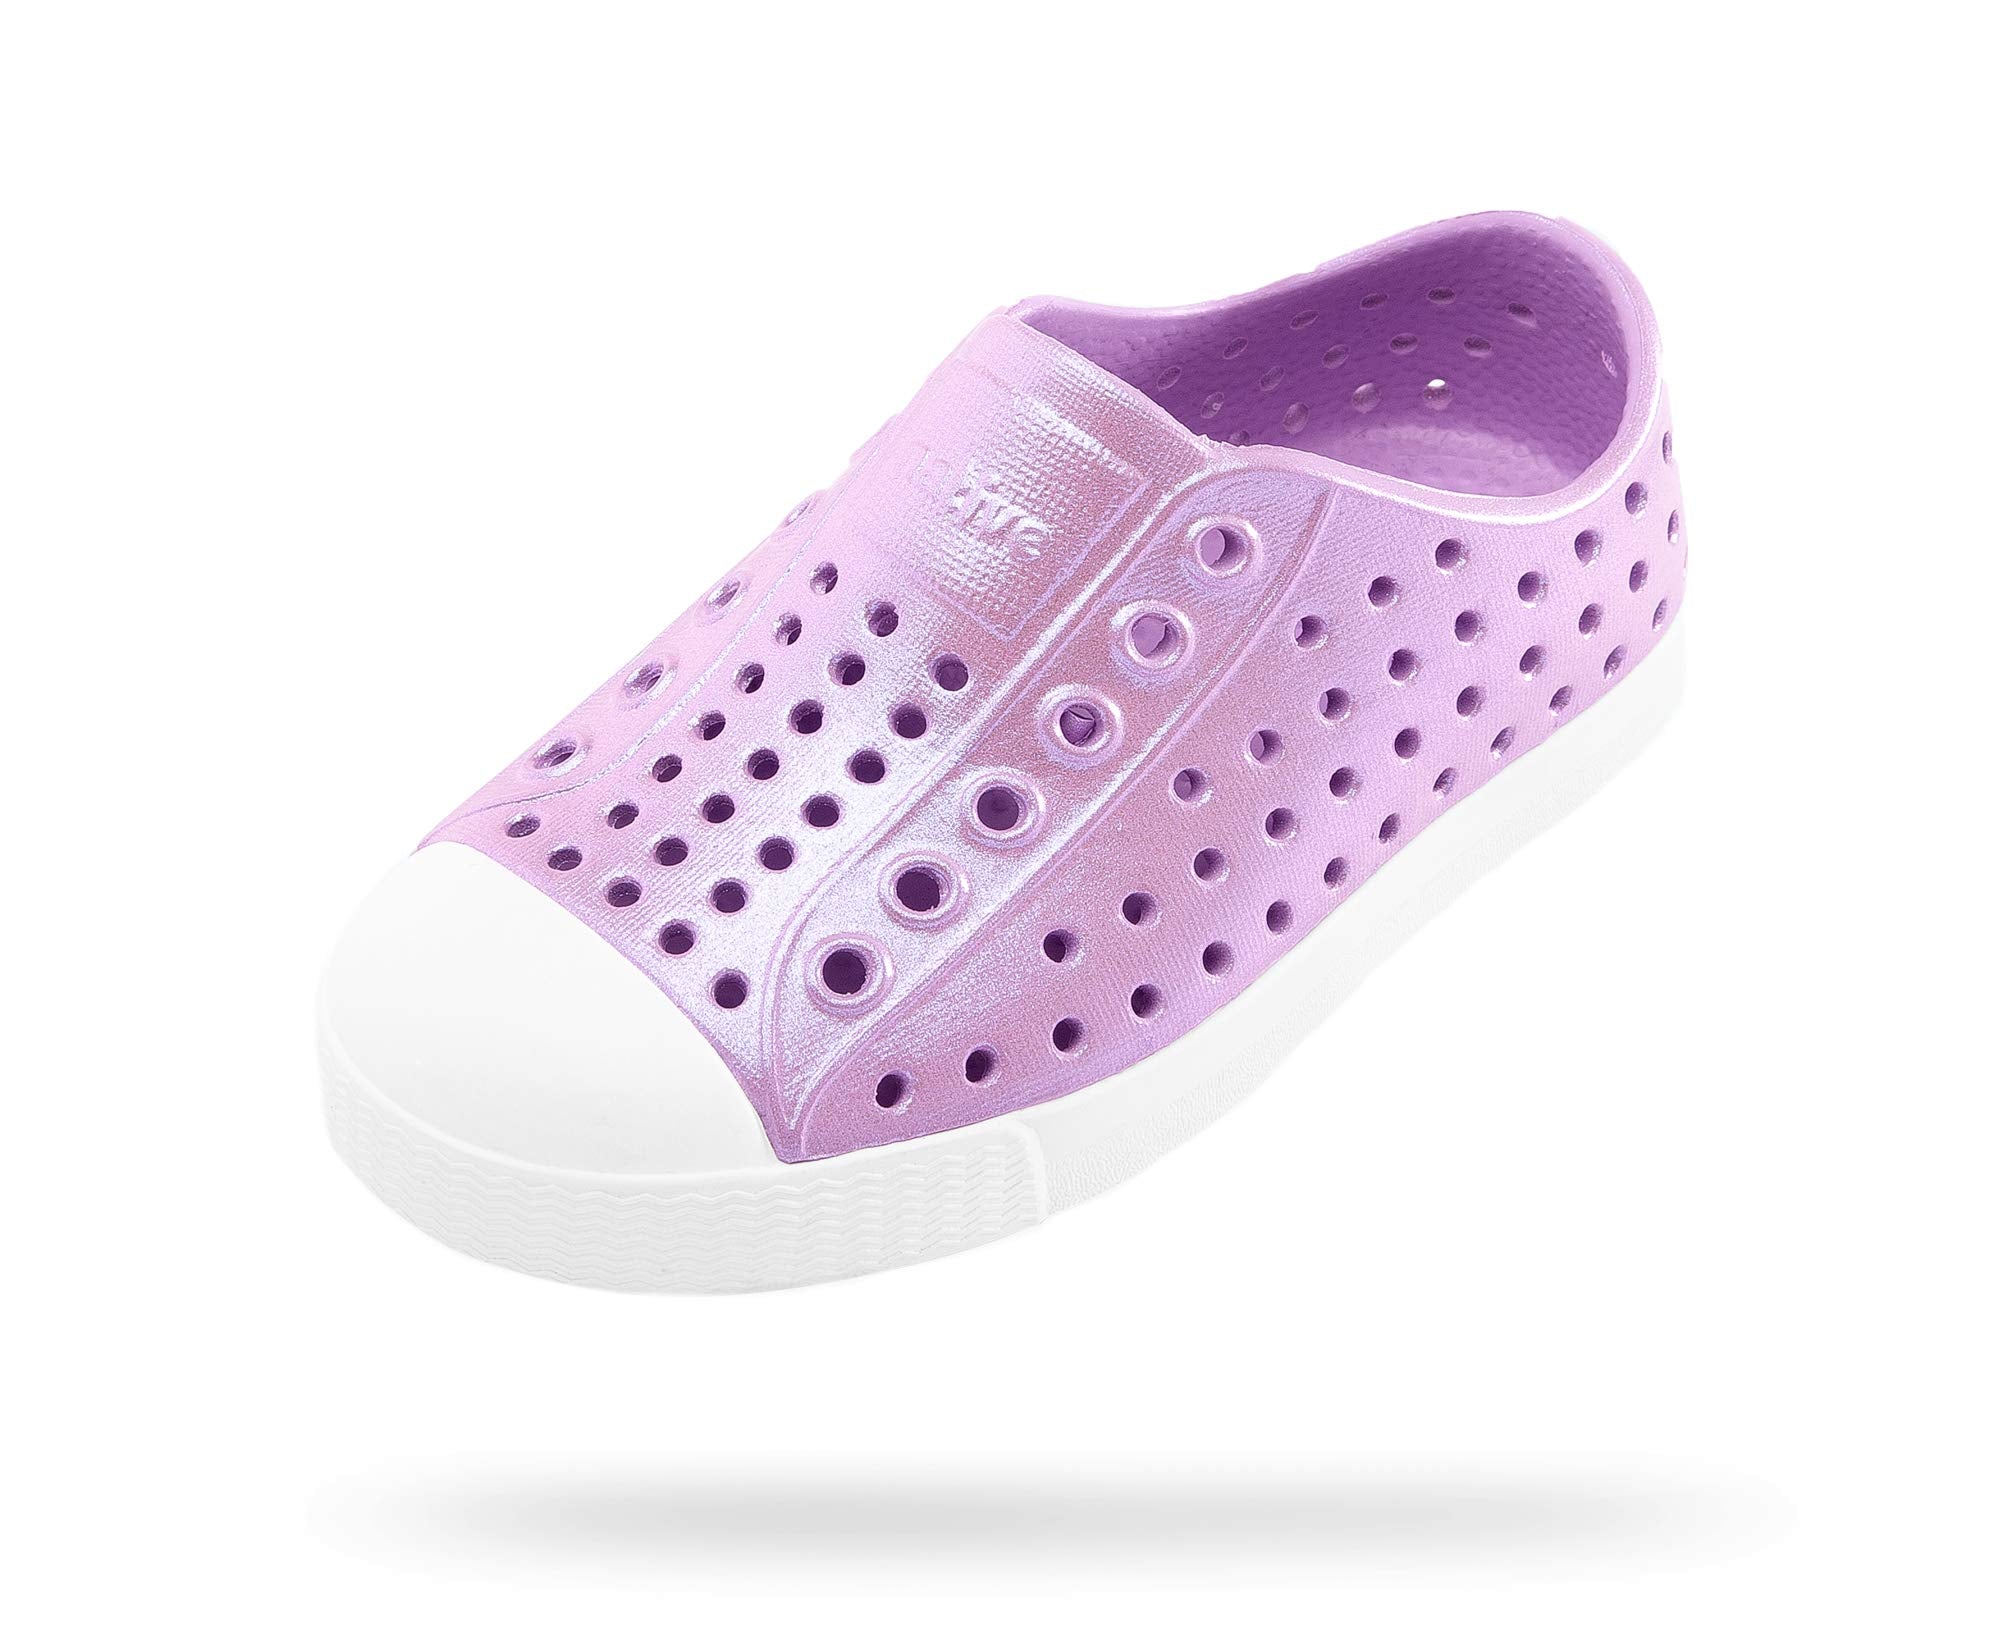 Native Shoes Girl's Jefferson Iridescent (Toddler/Little Kid) Lavender Purple/Shell White/Galaxy 5 Toddler M